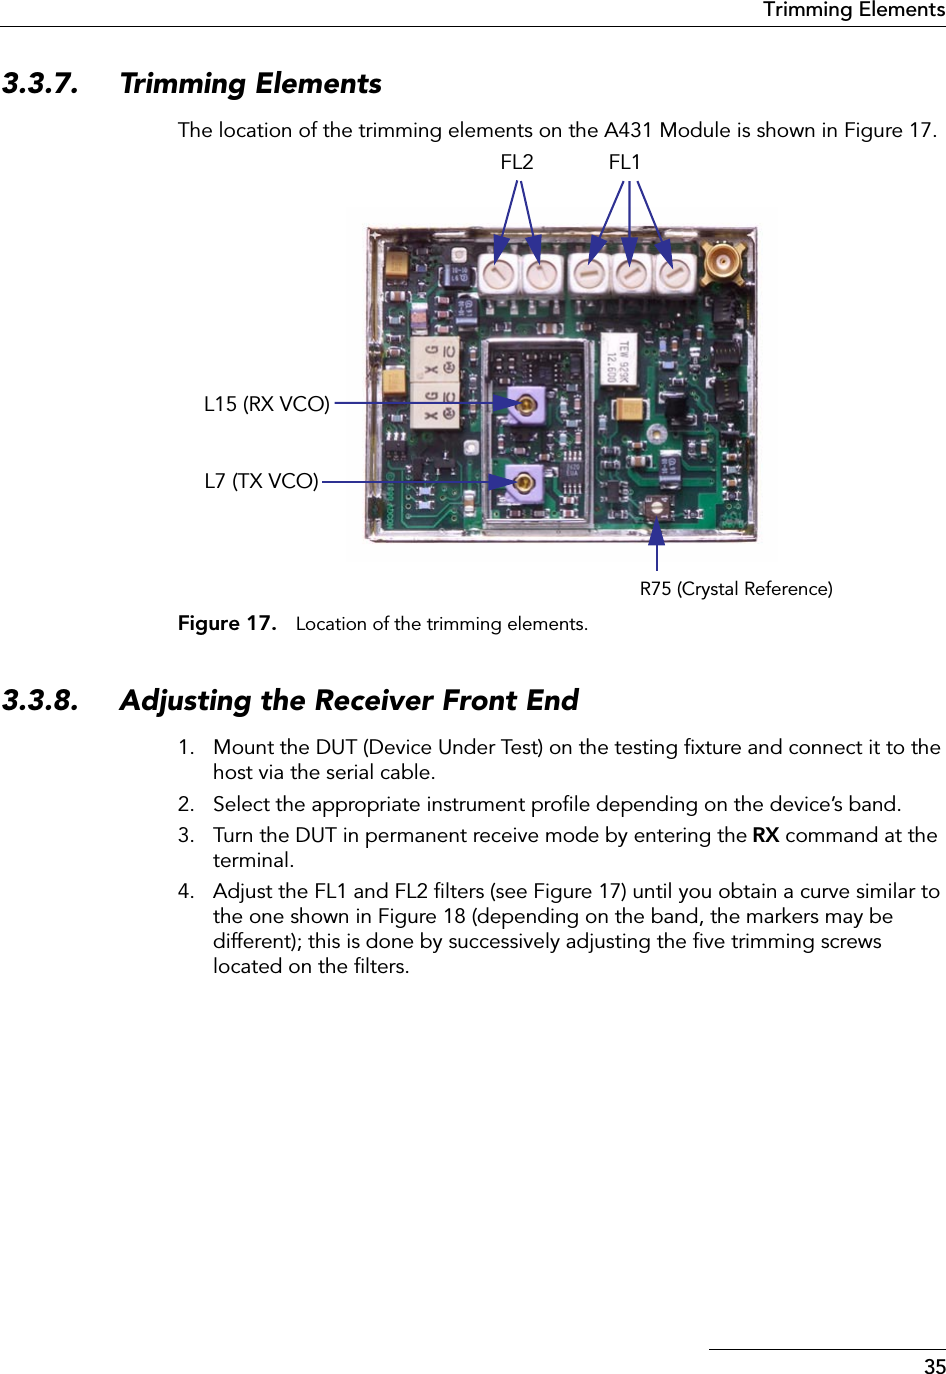 35Trimming Elements3.3.7. Trimming ElementsThe location of the trimming elements on the A431 Module is shown in Figure 17.Figure 17. Location of the trimming elements.3.3.8. Adjusting the Receiver Front End1. Mount the DUT (Device Under Test) on the testing ﬁxture and connect it to the host via the serial cable.2. Select the appropriate instrument proﬁle depending on the device’s band.3. Turn the DUT in permanent receive mode by entering the RX command at the terminal.4. Adjust the FL1 and FL2 ﬁlters (see Figure 17) until you obtain a curve similar to the one shown in Figure 18 (depending on the band, the markers may be different); this is done by successively adjusting the ﬁve trimming screws located on the ﬁlters.R75 (Crystal Reference)FL1FL2L15 (RX VCO)L7 (TX VCO)